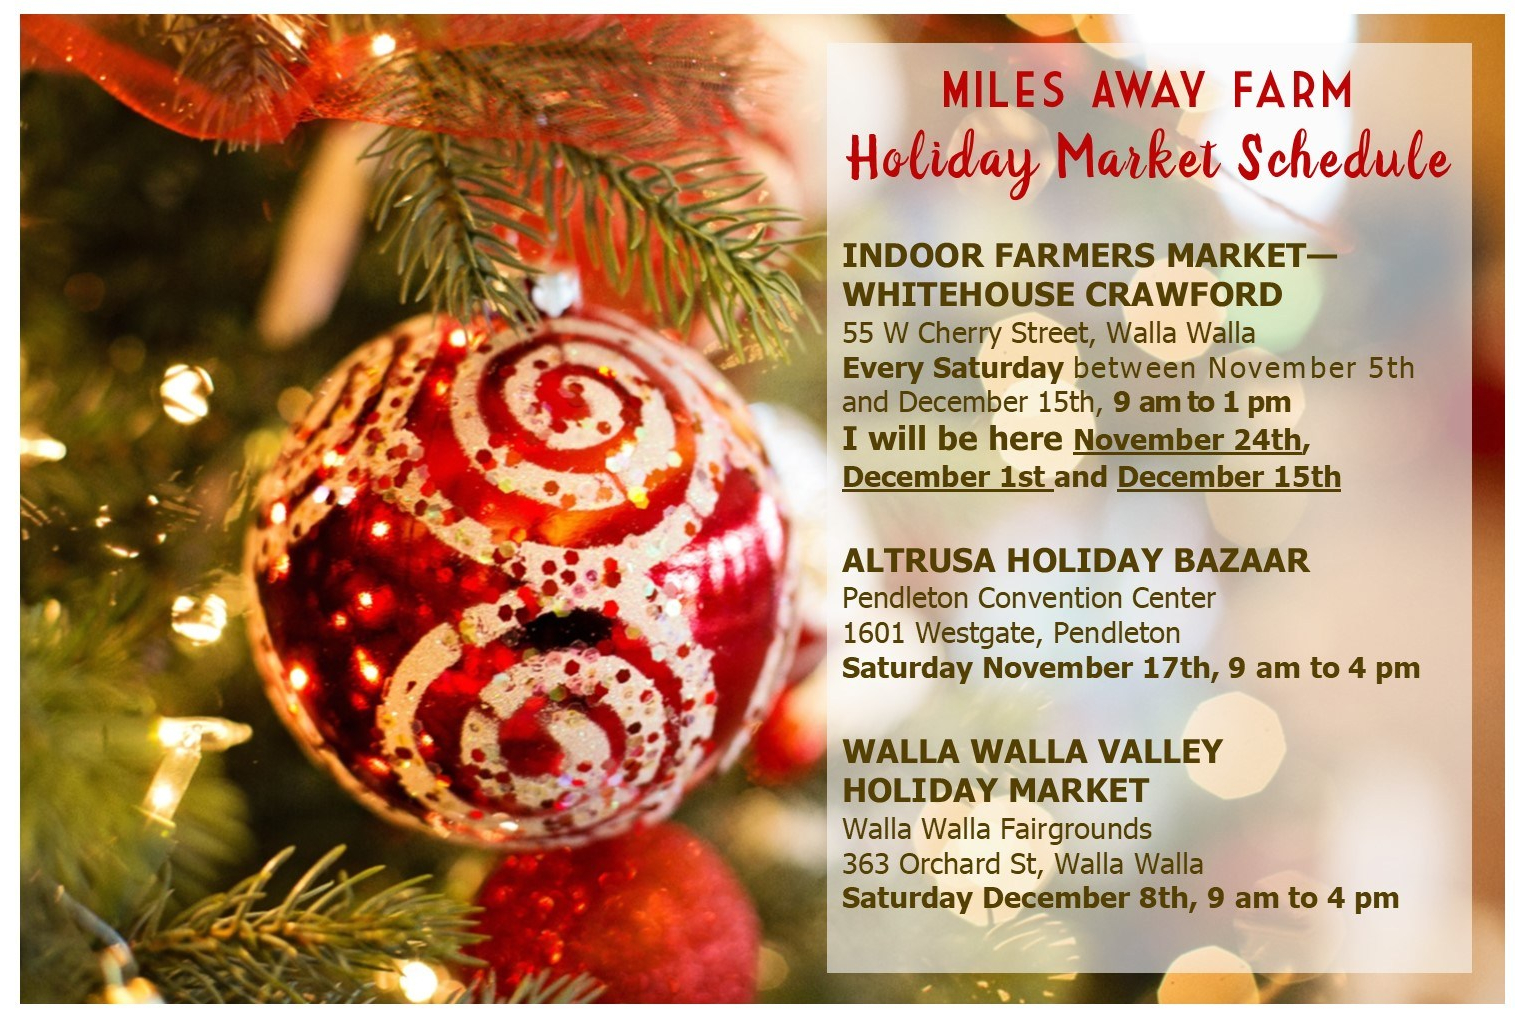 Miles Away Farm Holiday Show schedule